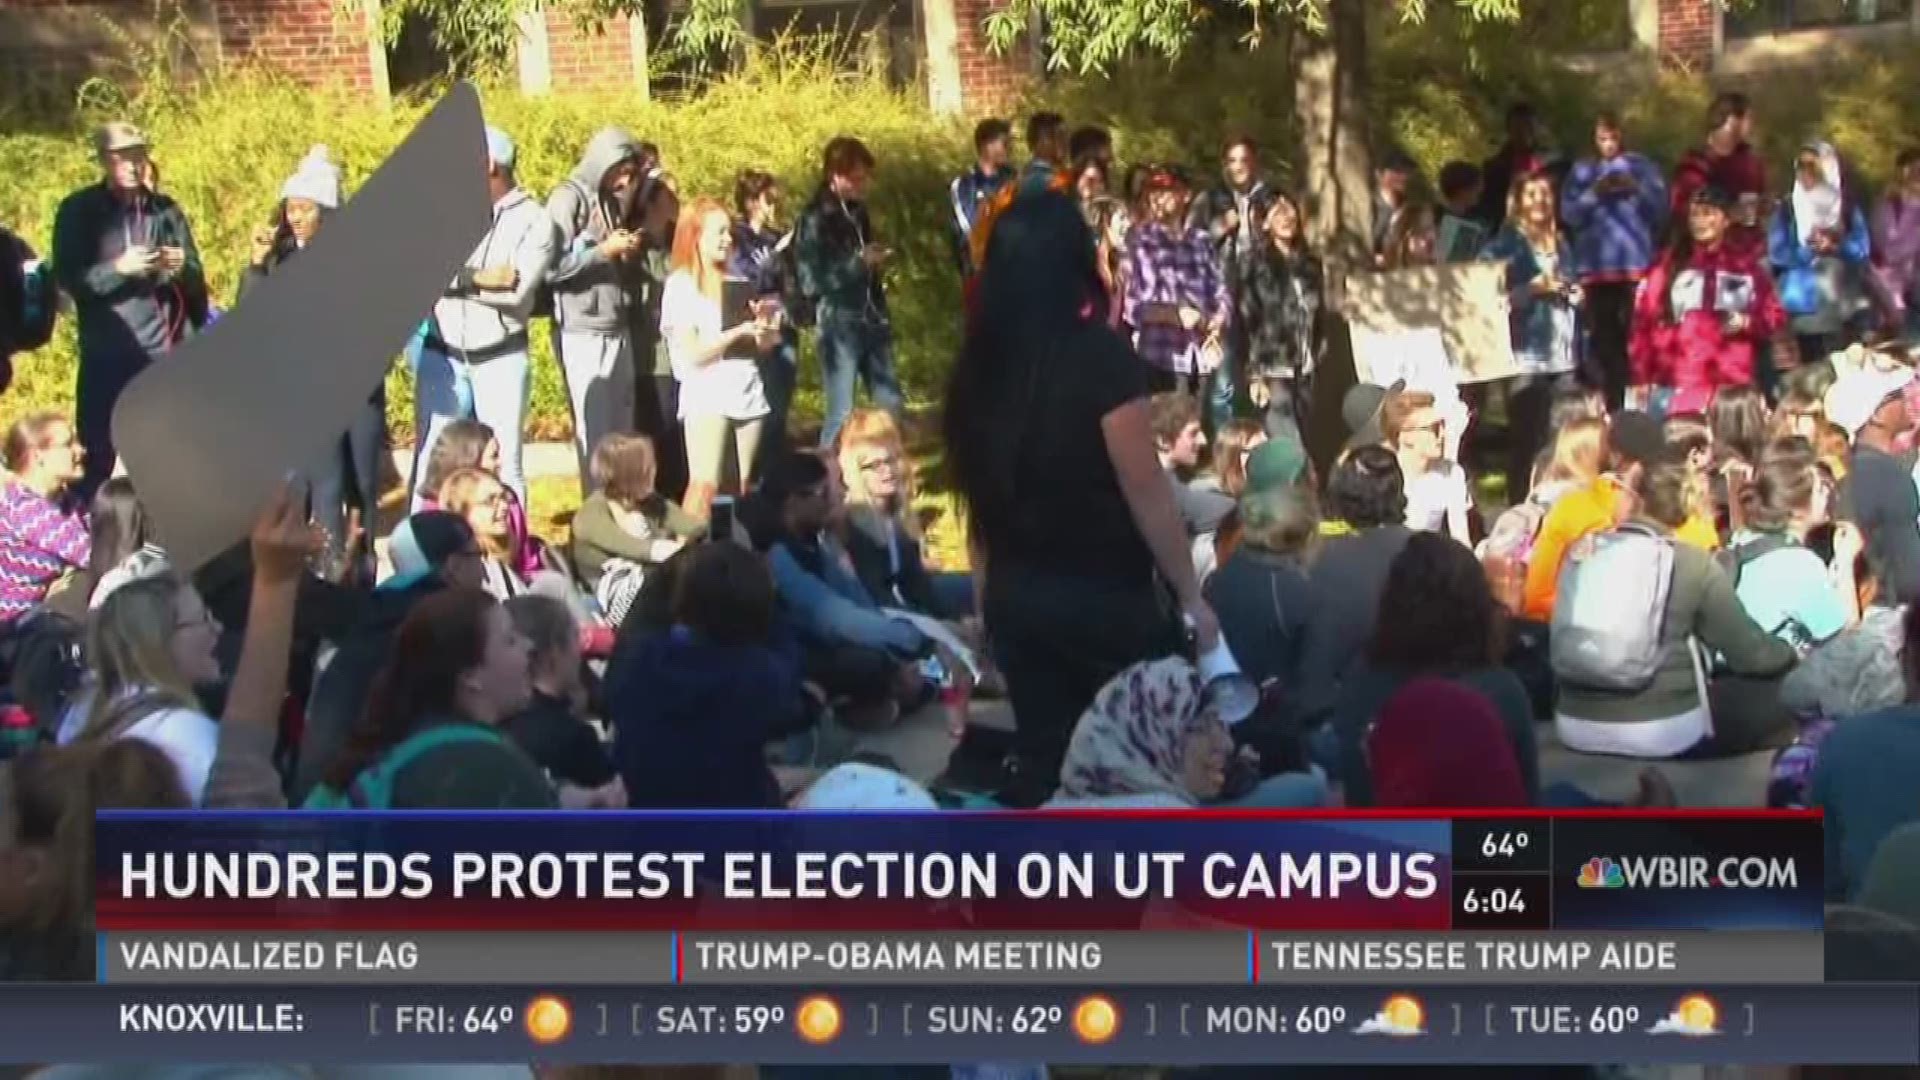 Several hundred people are gathered on the UT campus to protest the election of Donald Trump as president.